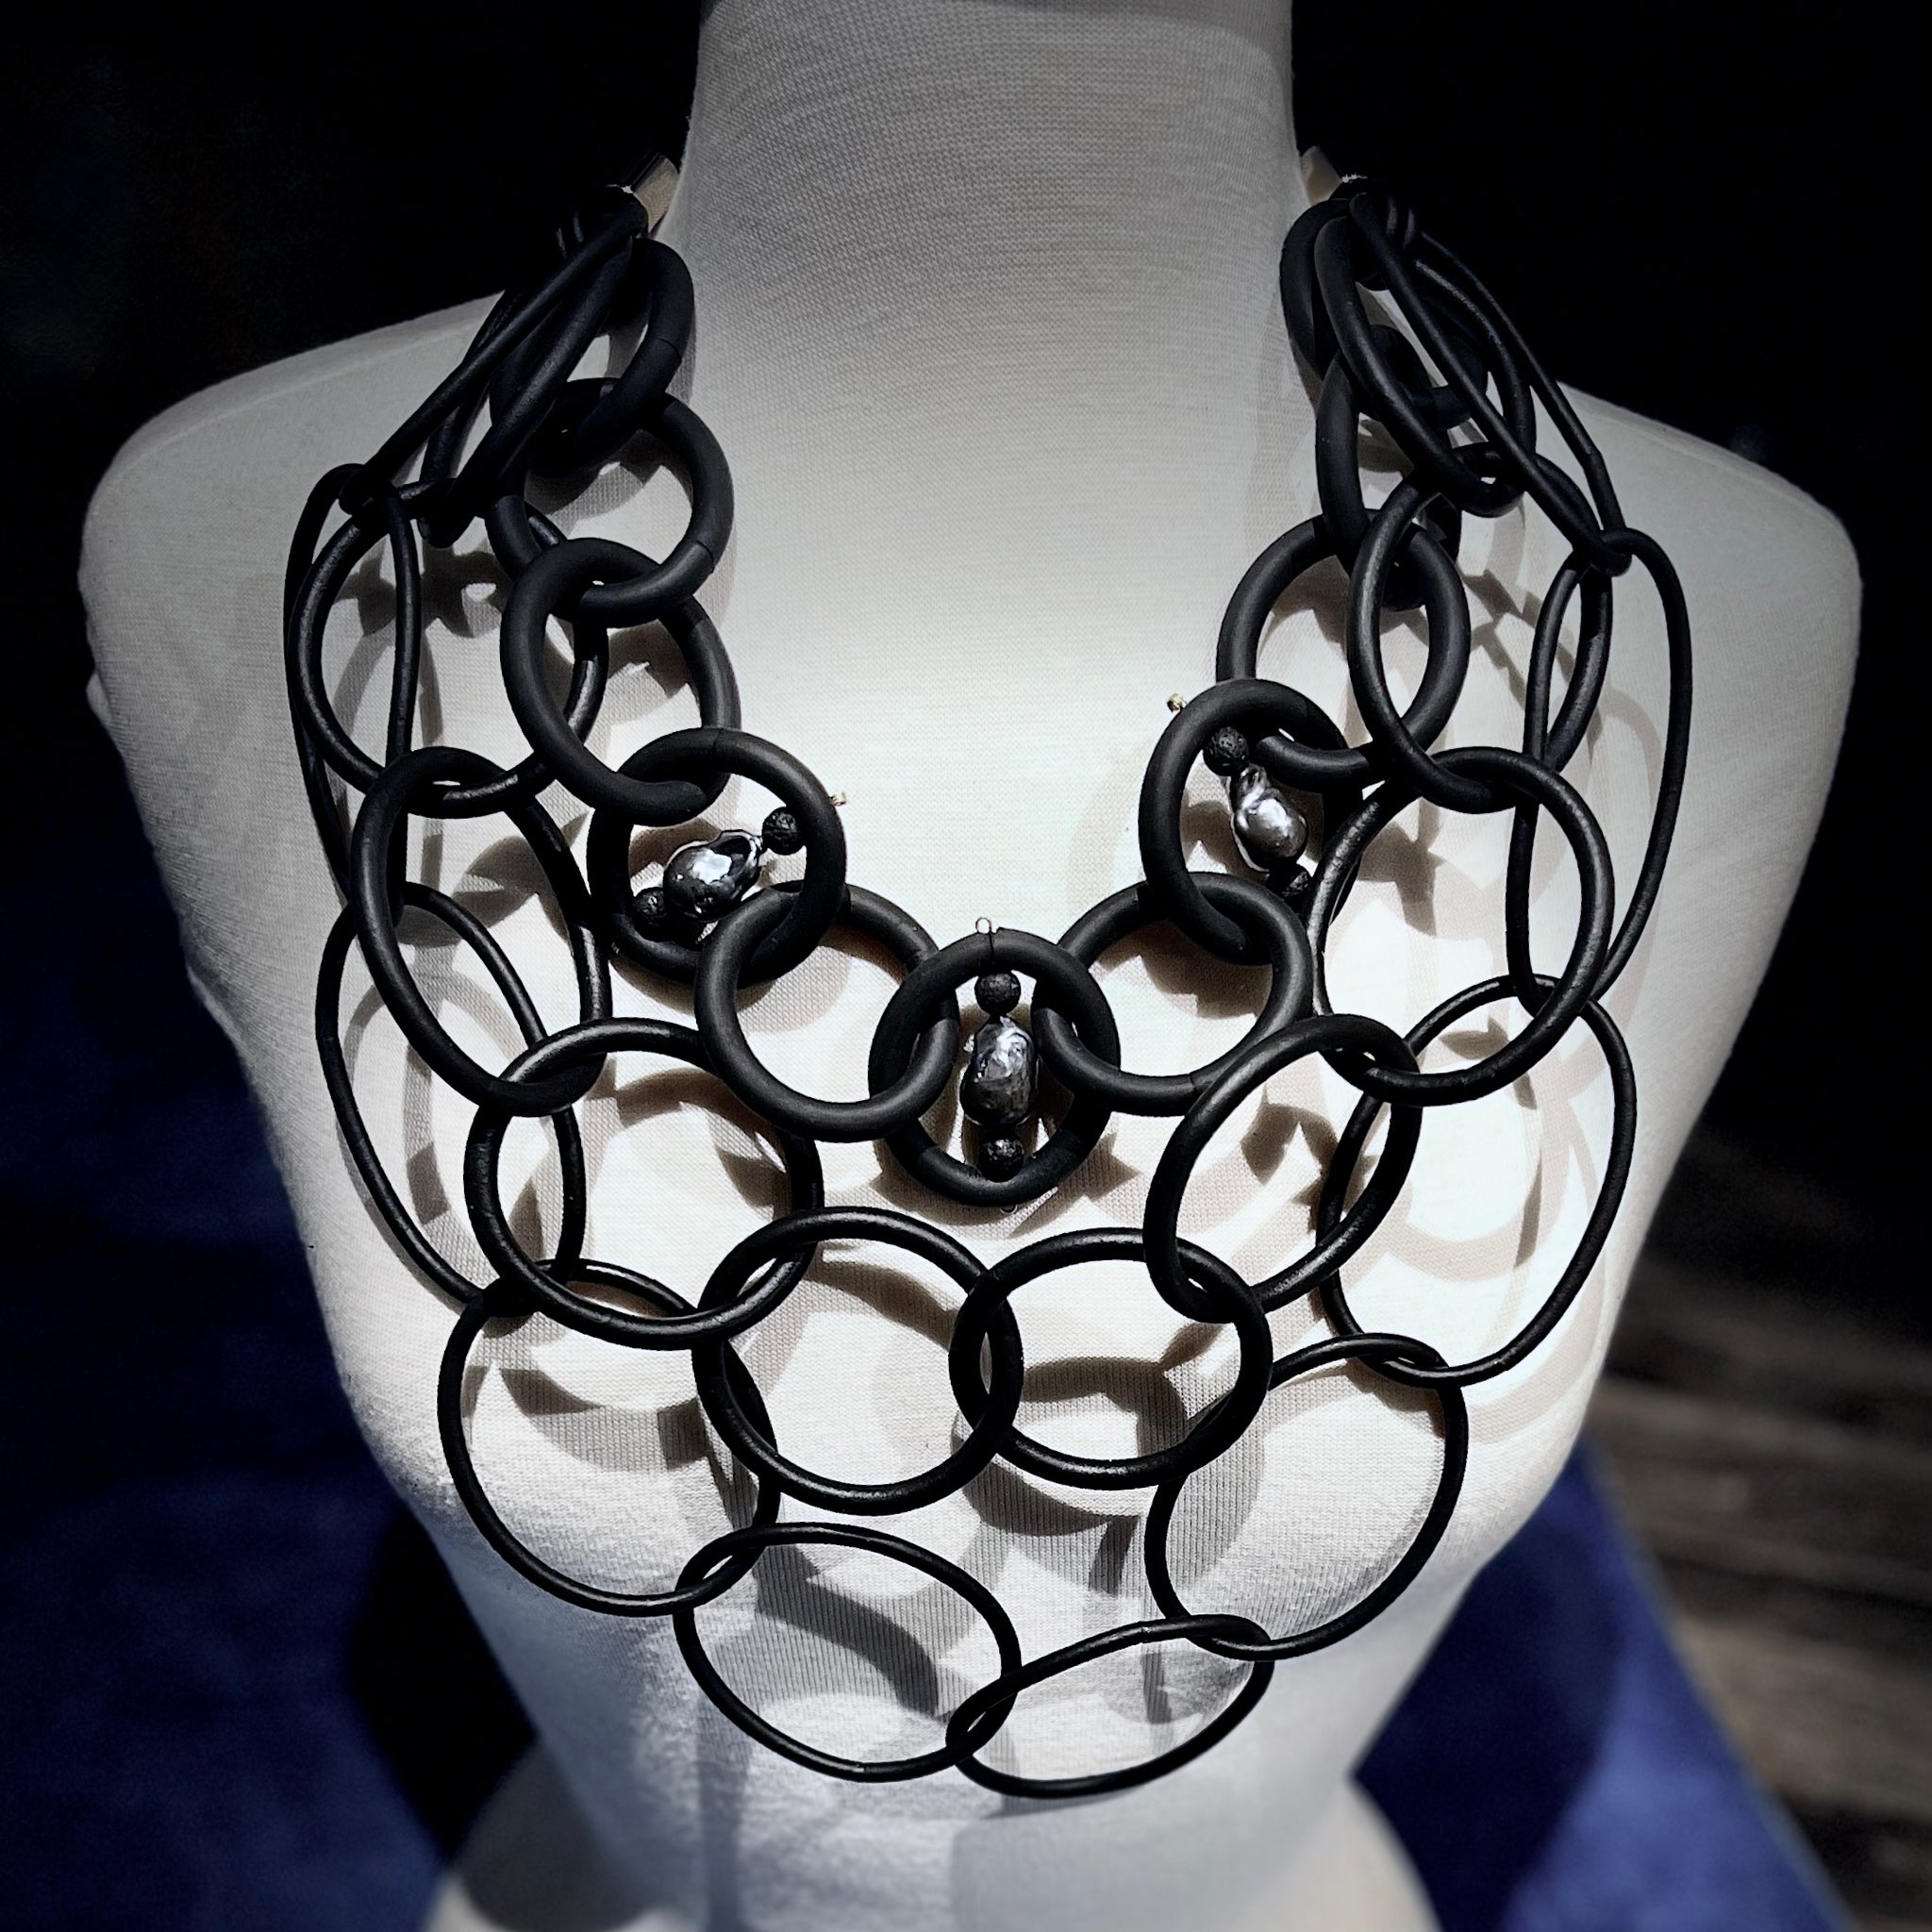 Multi-strand Rubber Statement Necklace with Baroque Pearls